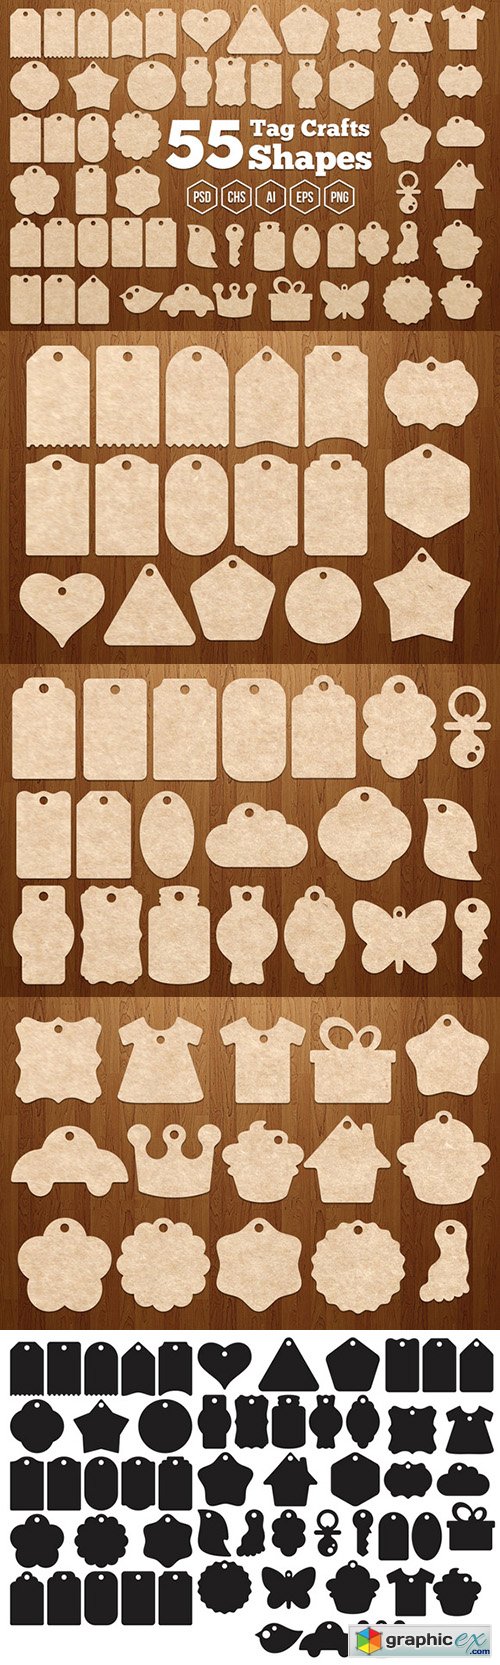 55 Tag Crafts Shapes